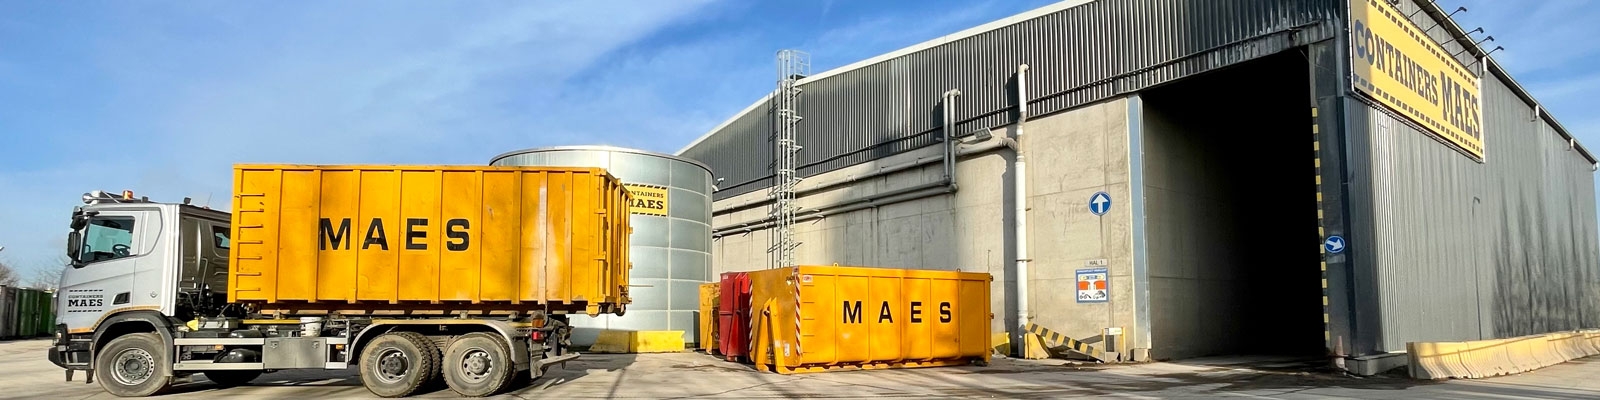 Containers Maes Slider Tienen1